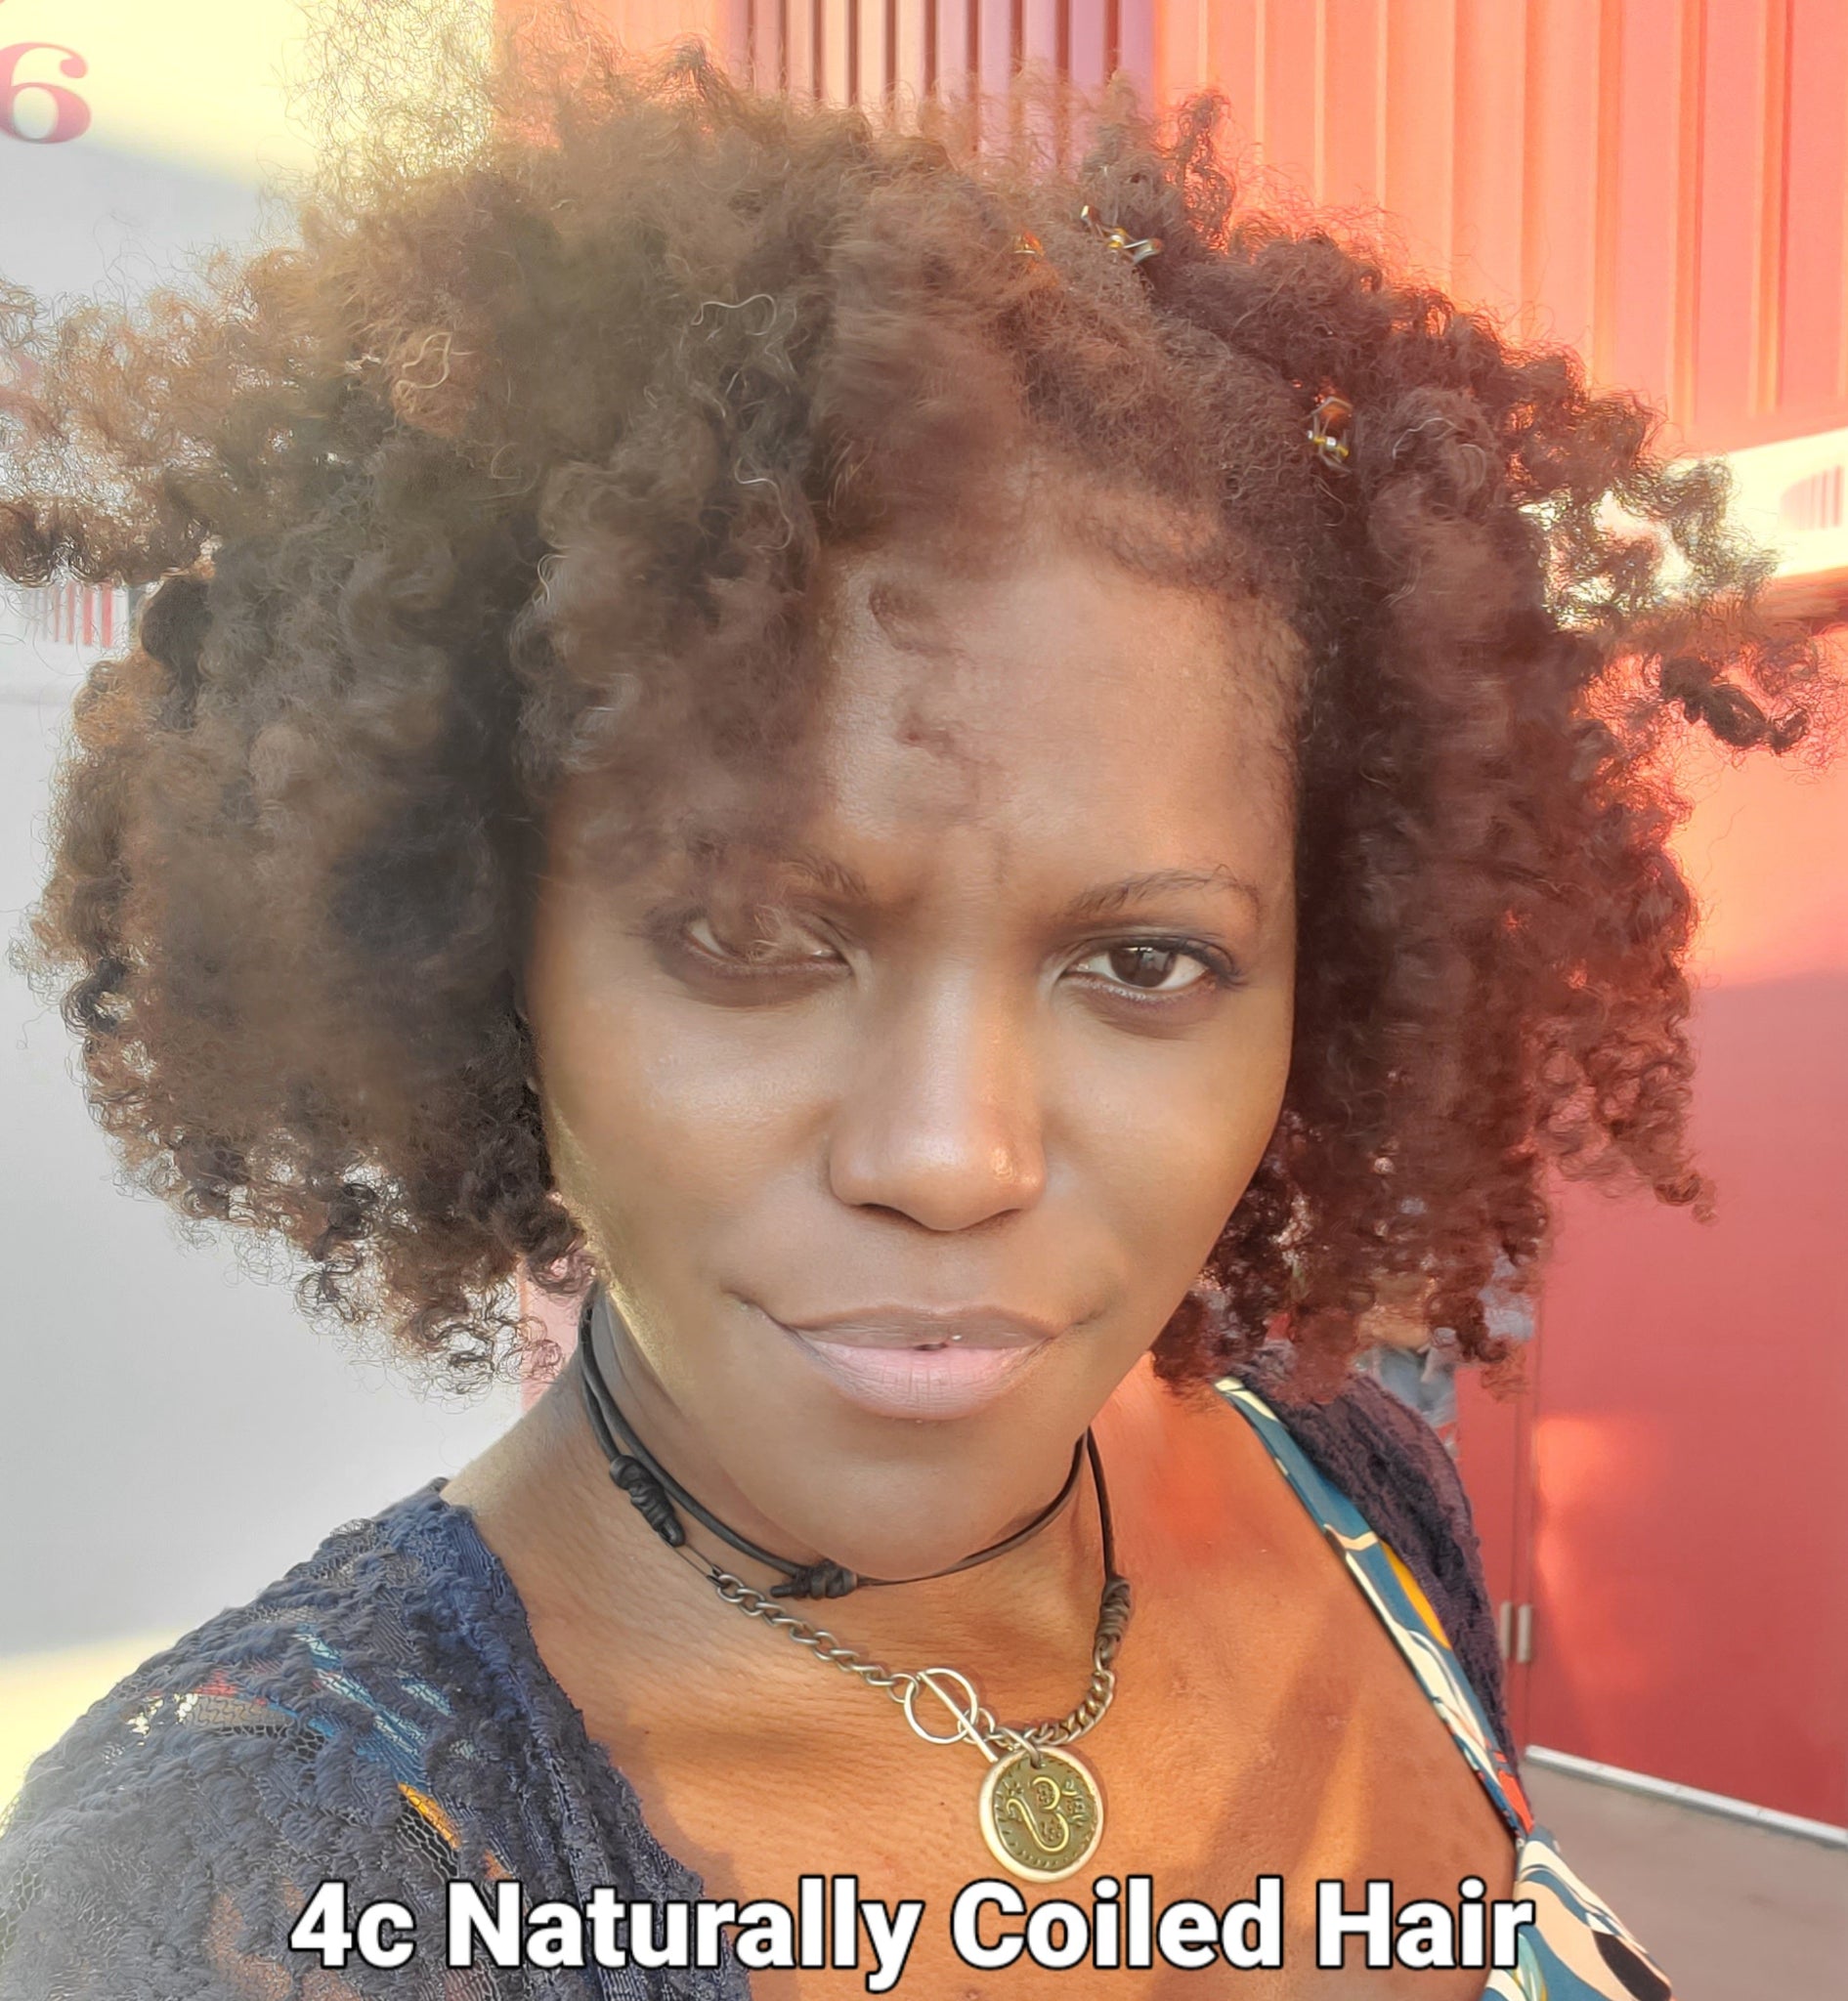 How to Manage 4c Natural Hair